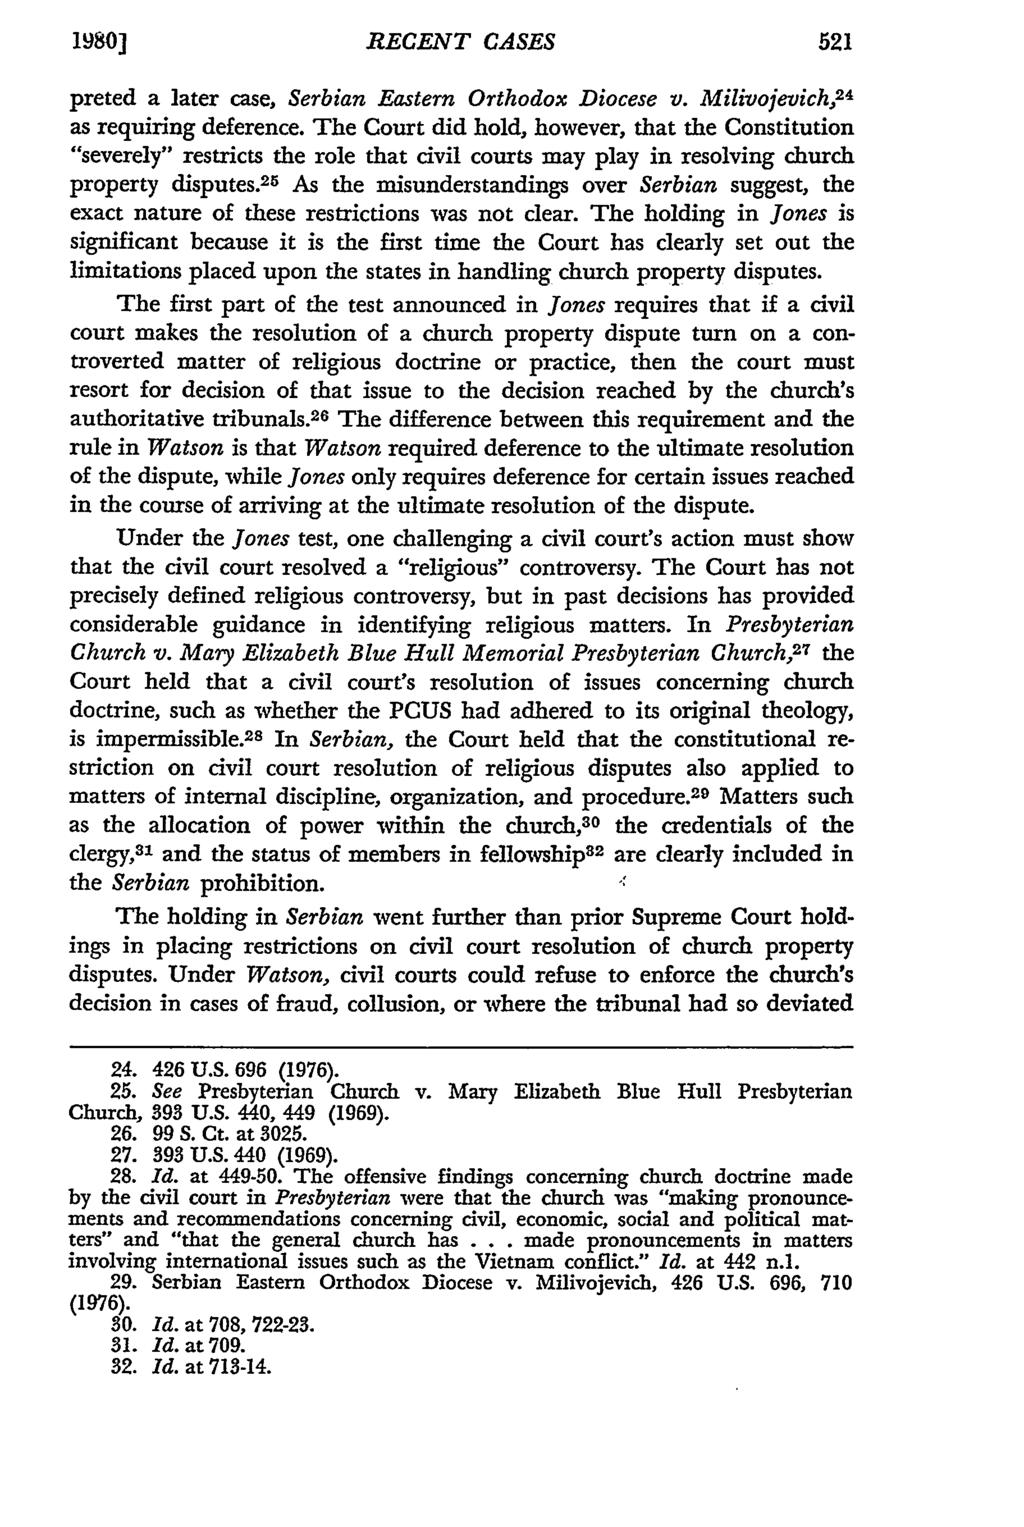 1980] RECENT CASES Missouri Law Review, Vol. 45, Iss. 3 [1980], Art. 8 preted a later case, Serbian Eastern Orthodox Diocese v. Milivojevich, 2 4 as requiring deference.